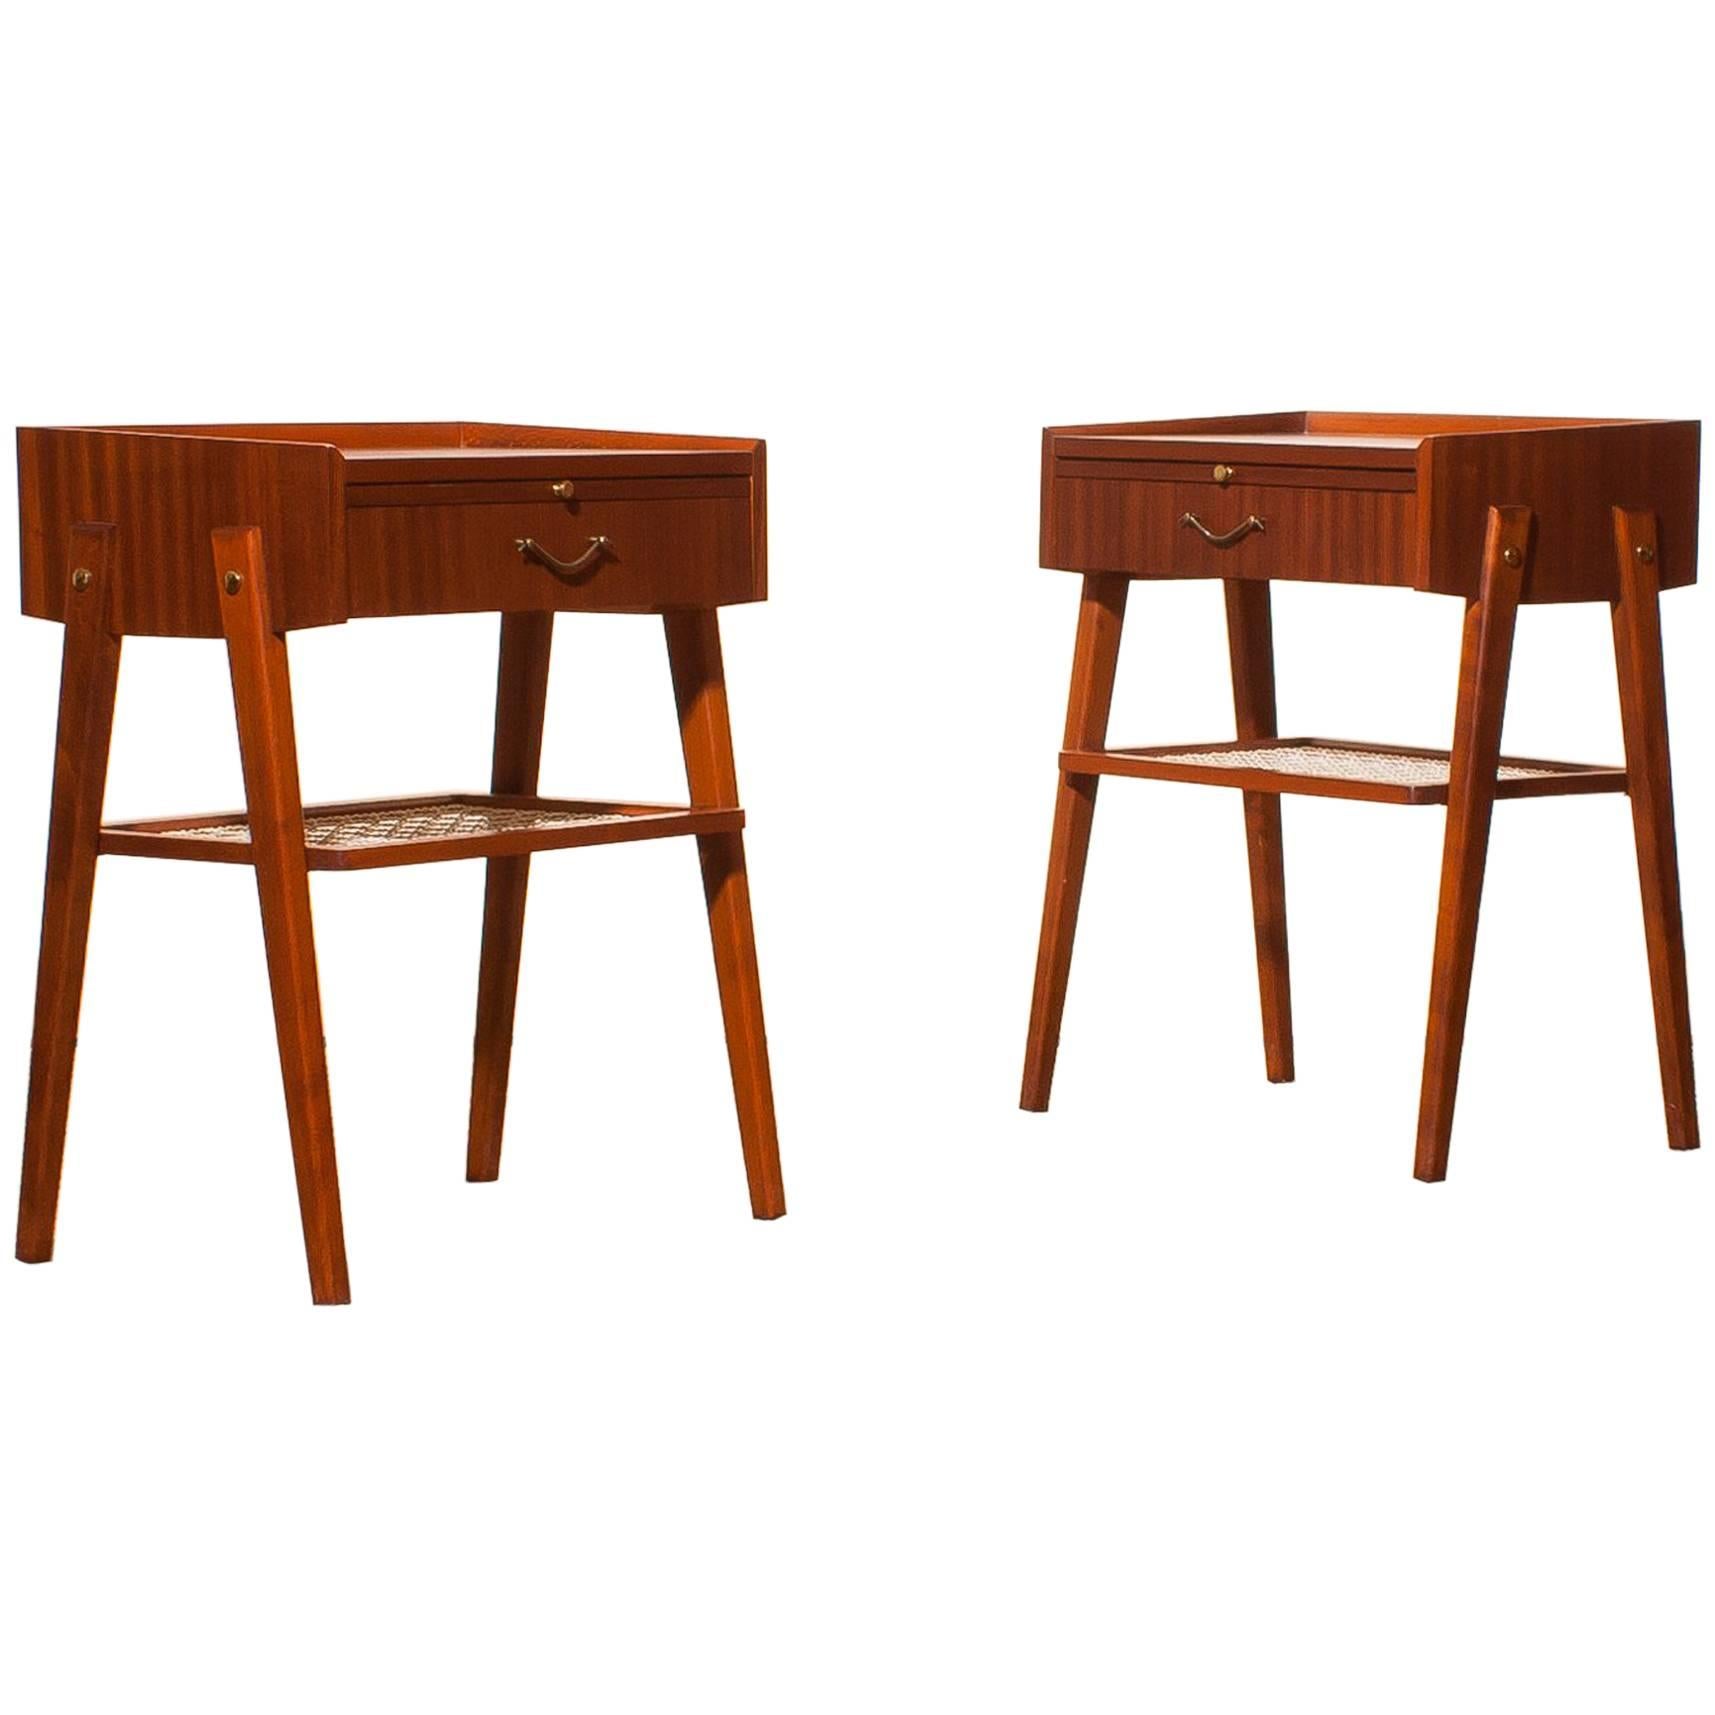 1960s Pair of Teak and Brass Bedside Tables